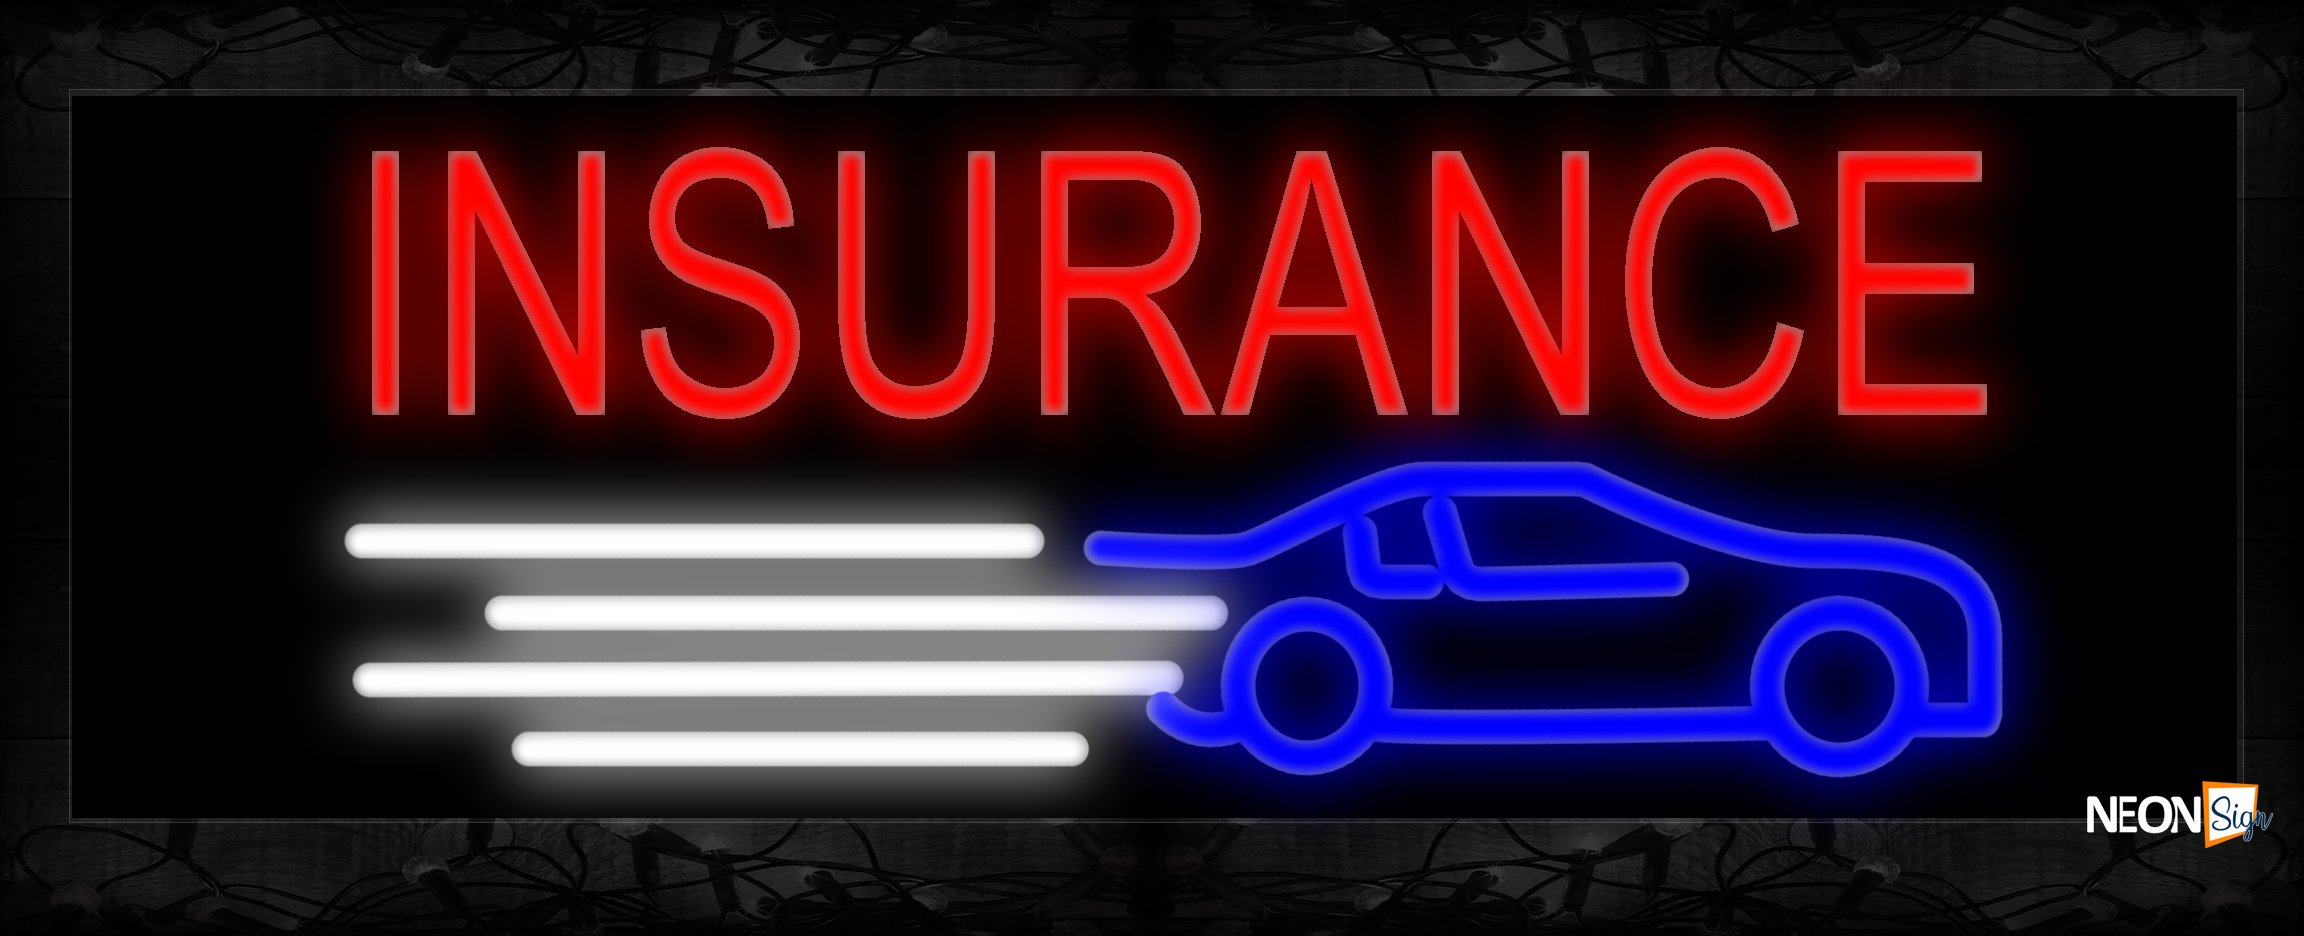 Image of 10563 Insurance in red with car logo Neon Sign 13x32 Black Backing